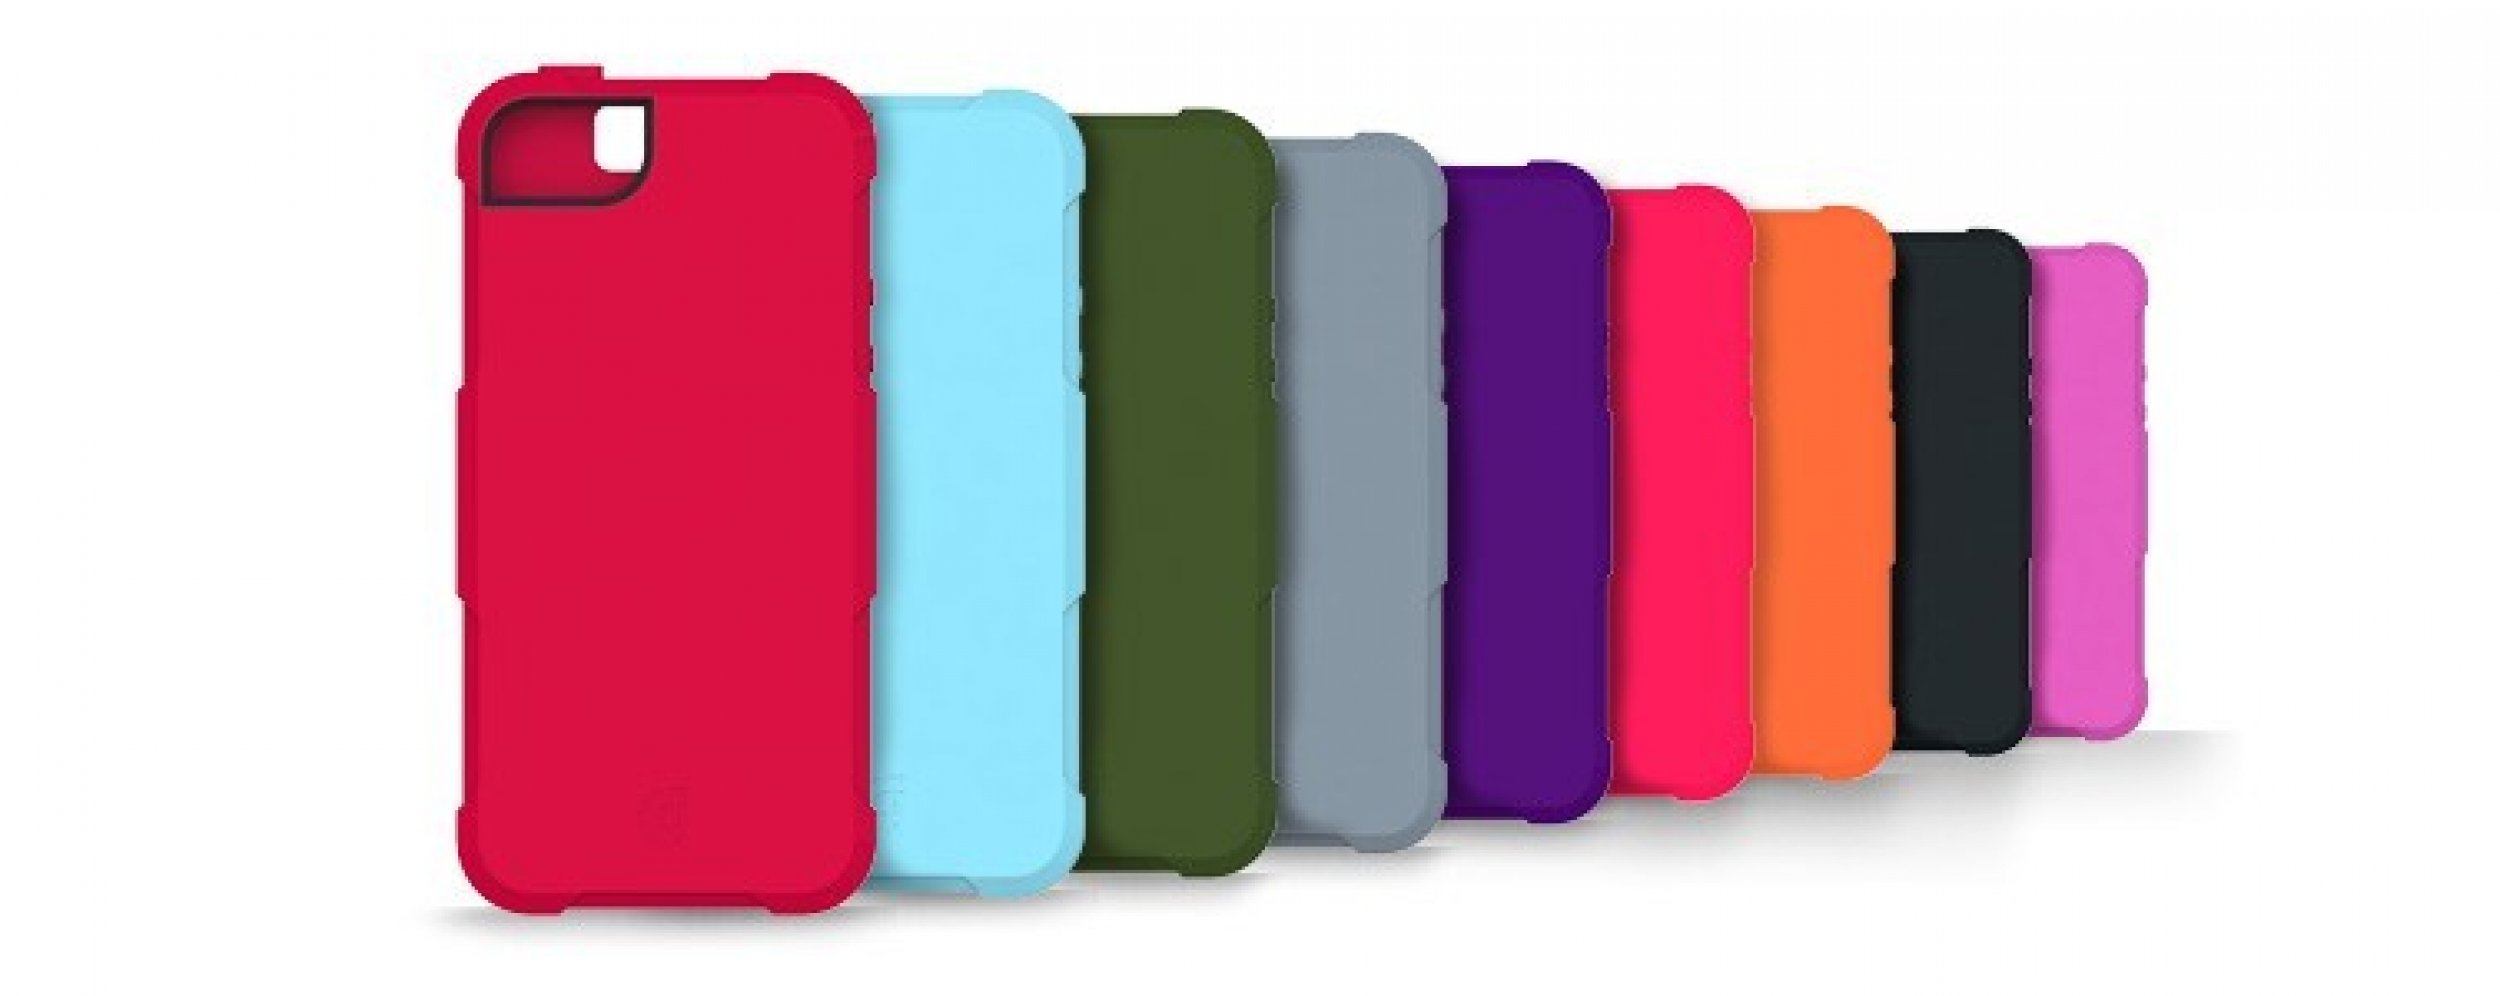 2. Minimalist Protector Case for iPhone 5 -Available for 19.99 